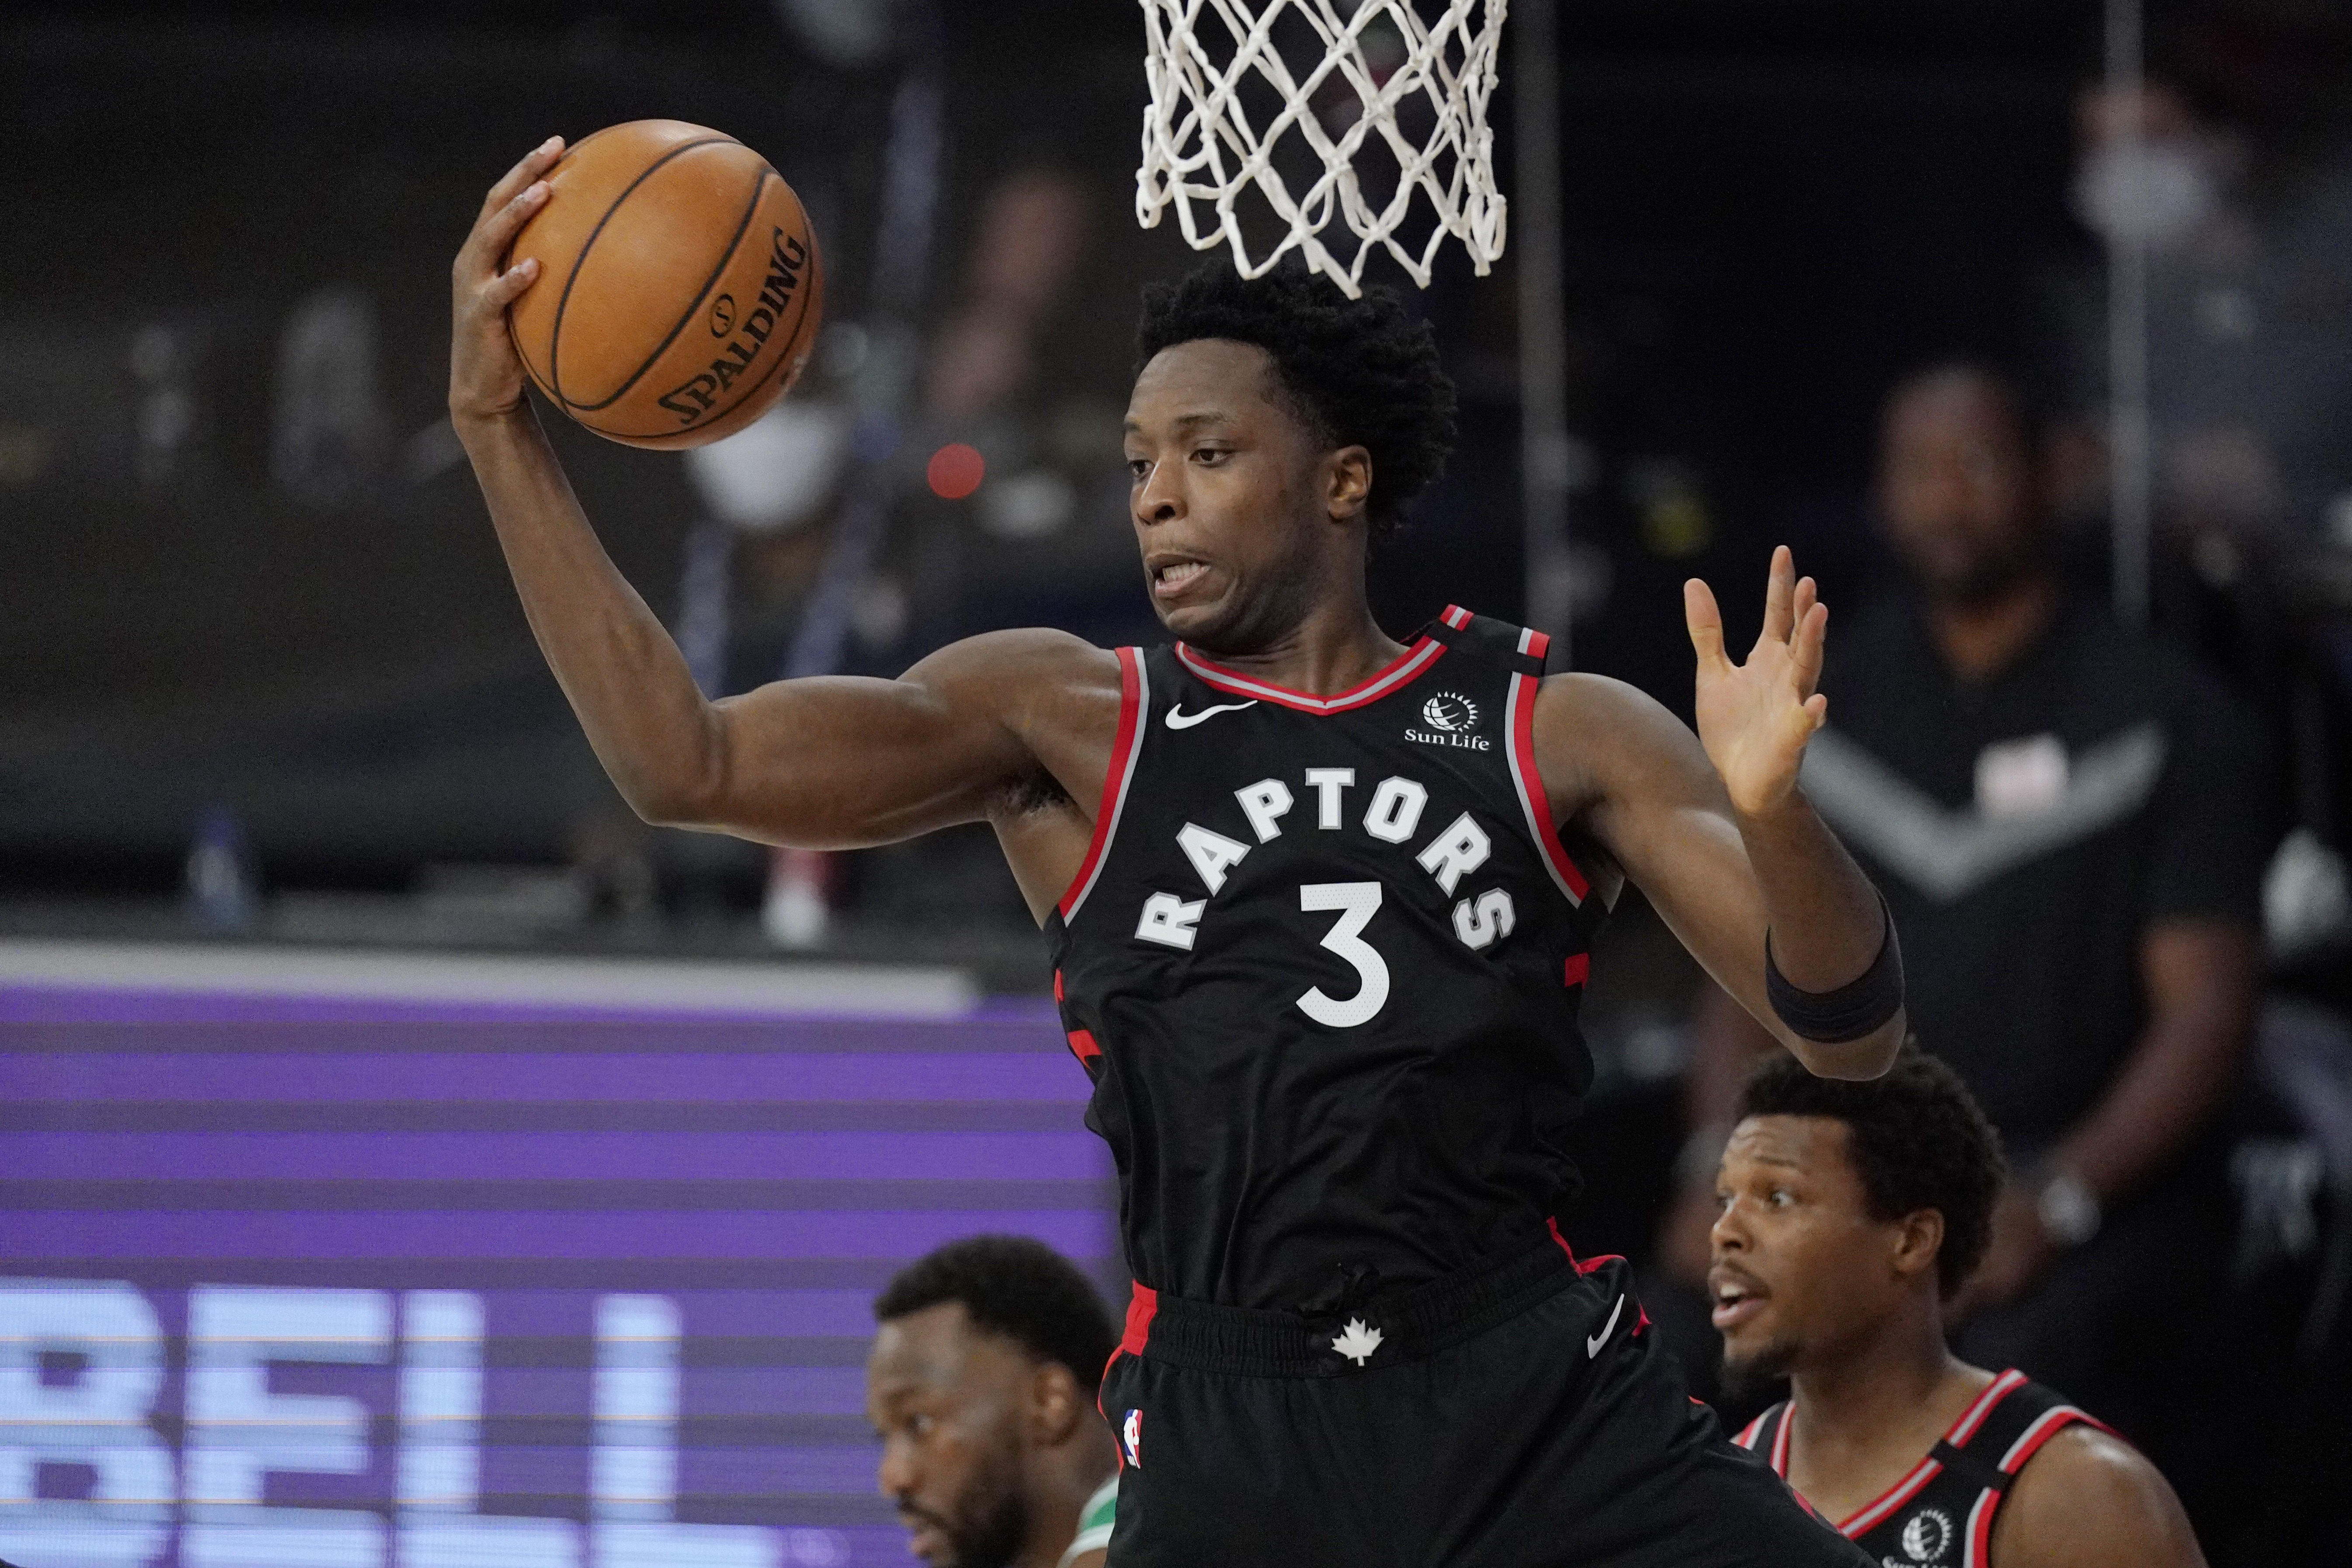 OG Anunoby on free agency: I just take it day by day and let me